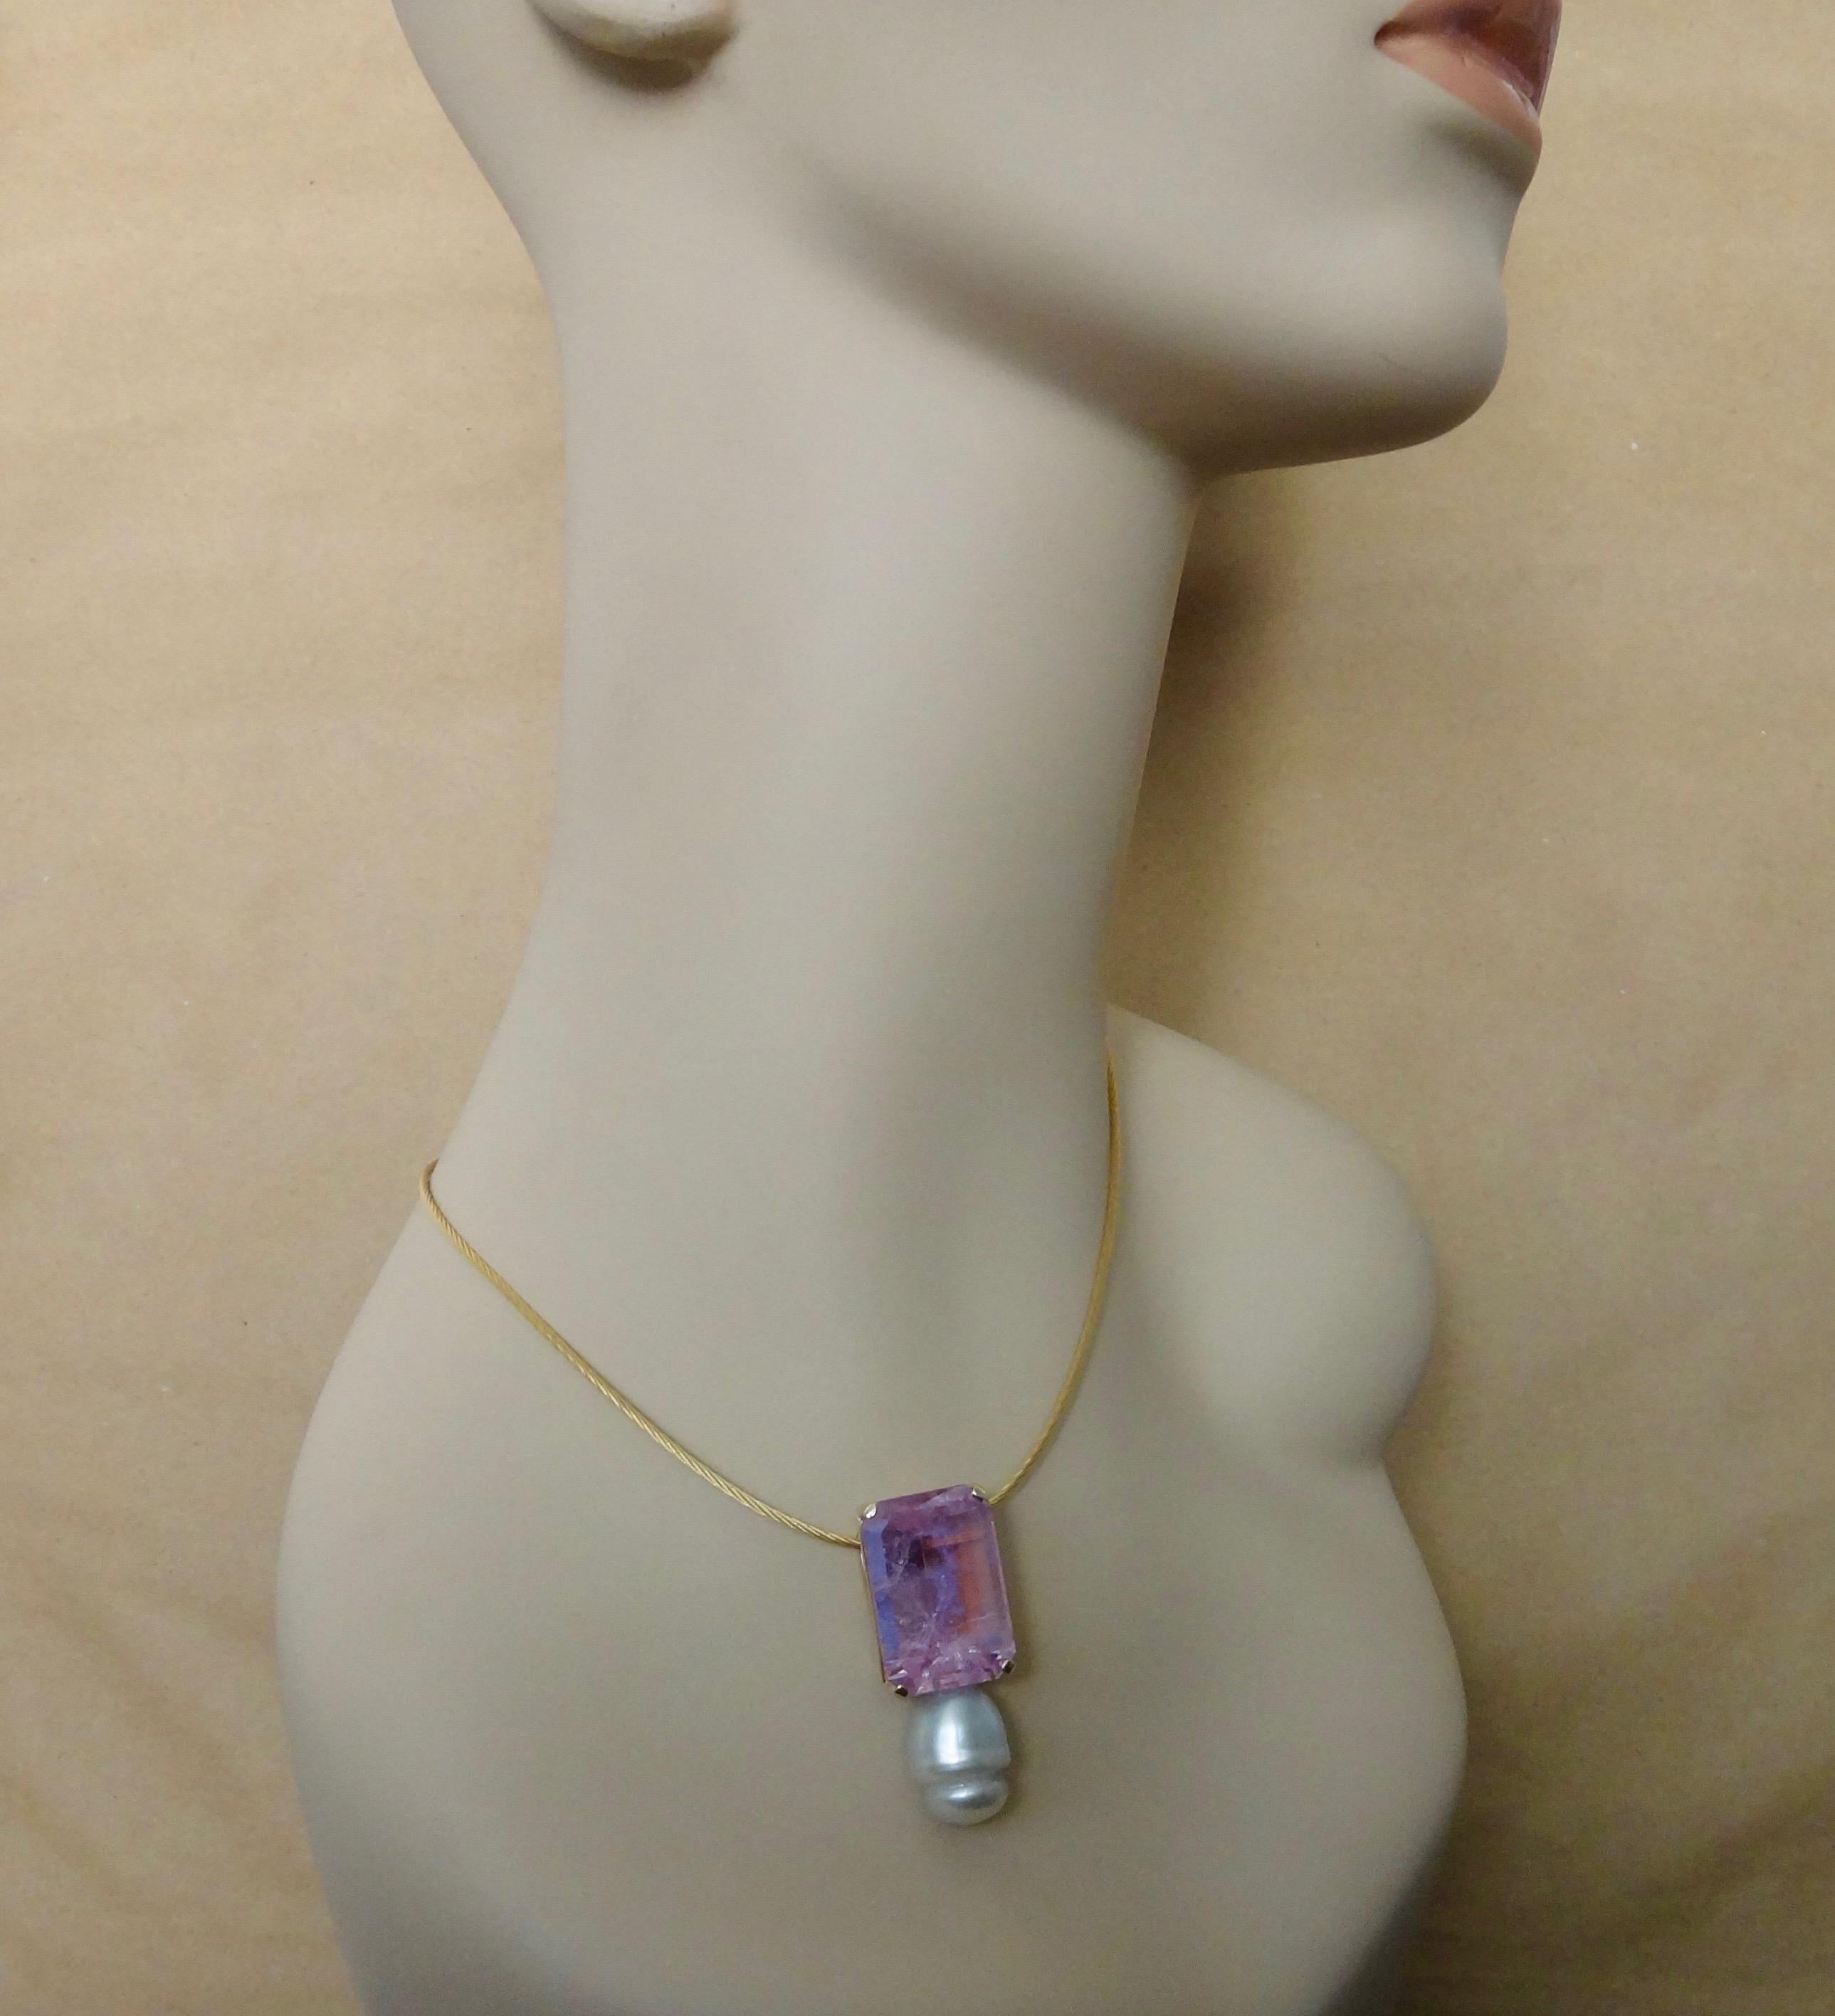 Kunzite (origin: Brazil) is the centerpiece of this impressive drop pendant.  Kunzite is a member of the spodumene family of gems.  This stone weighs 76.55 carats.  The gem is known for it's pink-violet color.  This specimen is polished to a mirror